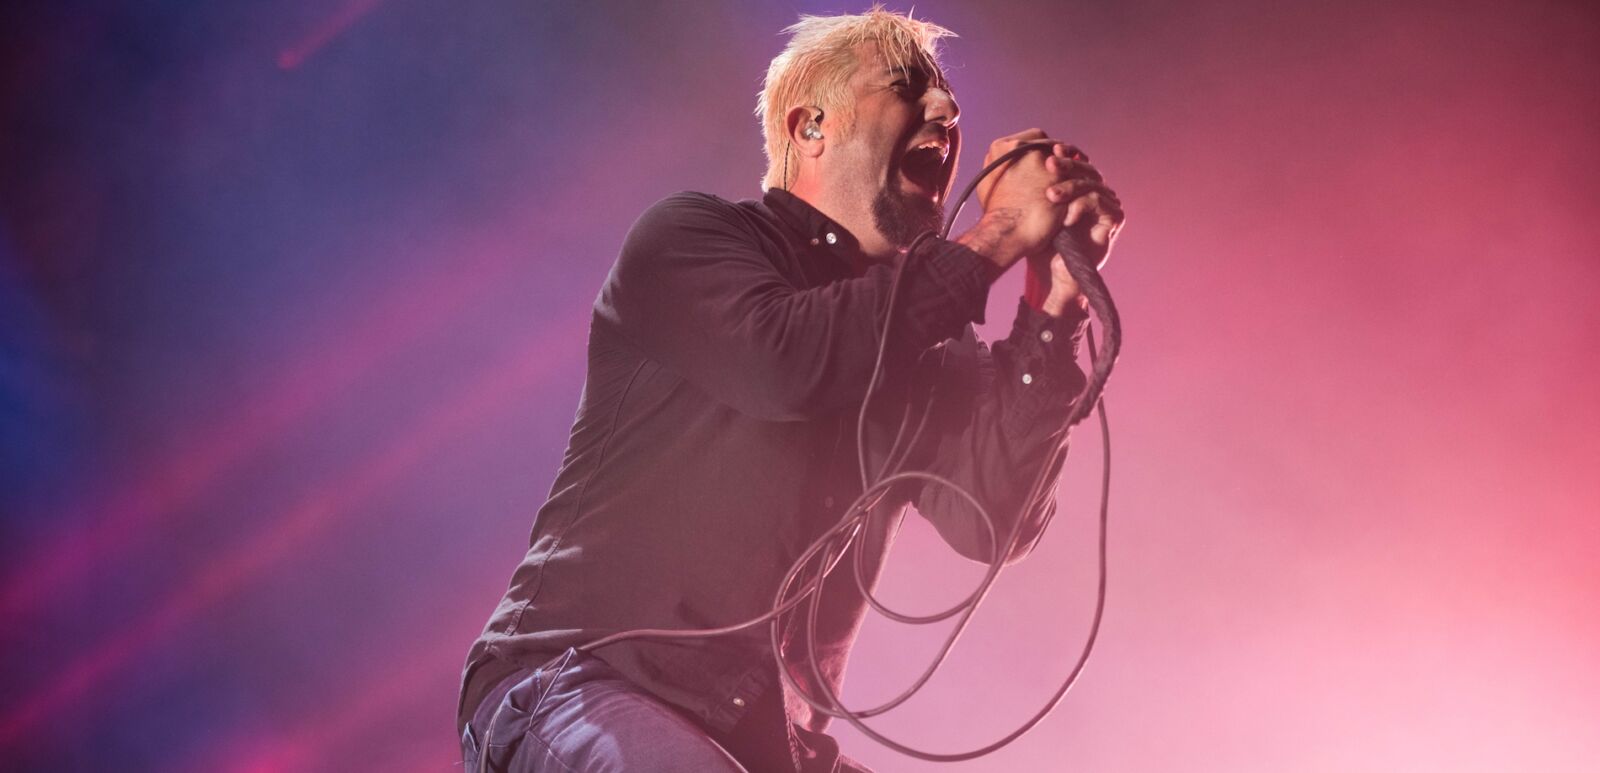 Chino Moreno of Deftones performs on stage at the SSE Arena Wembley on June 3, 2016 in London. Photo via Shutterstock.